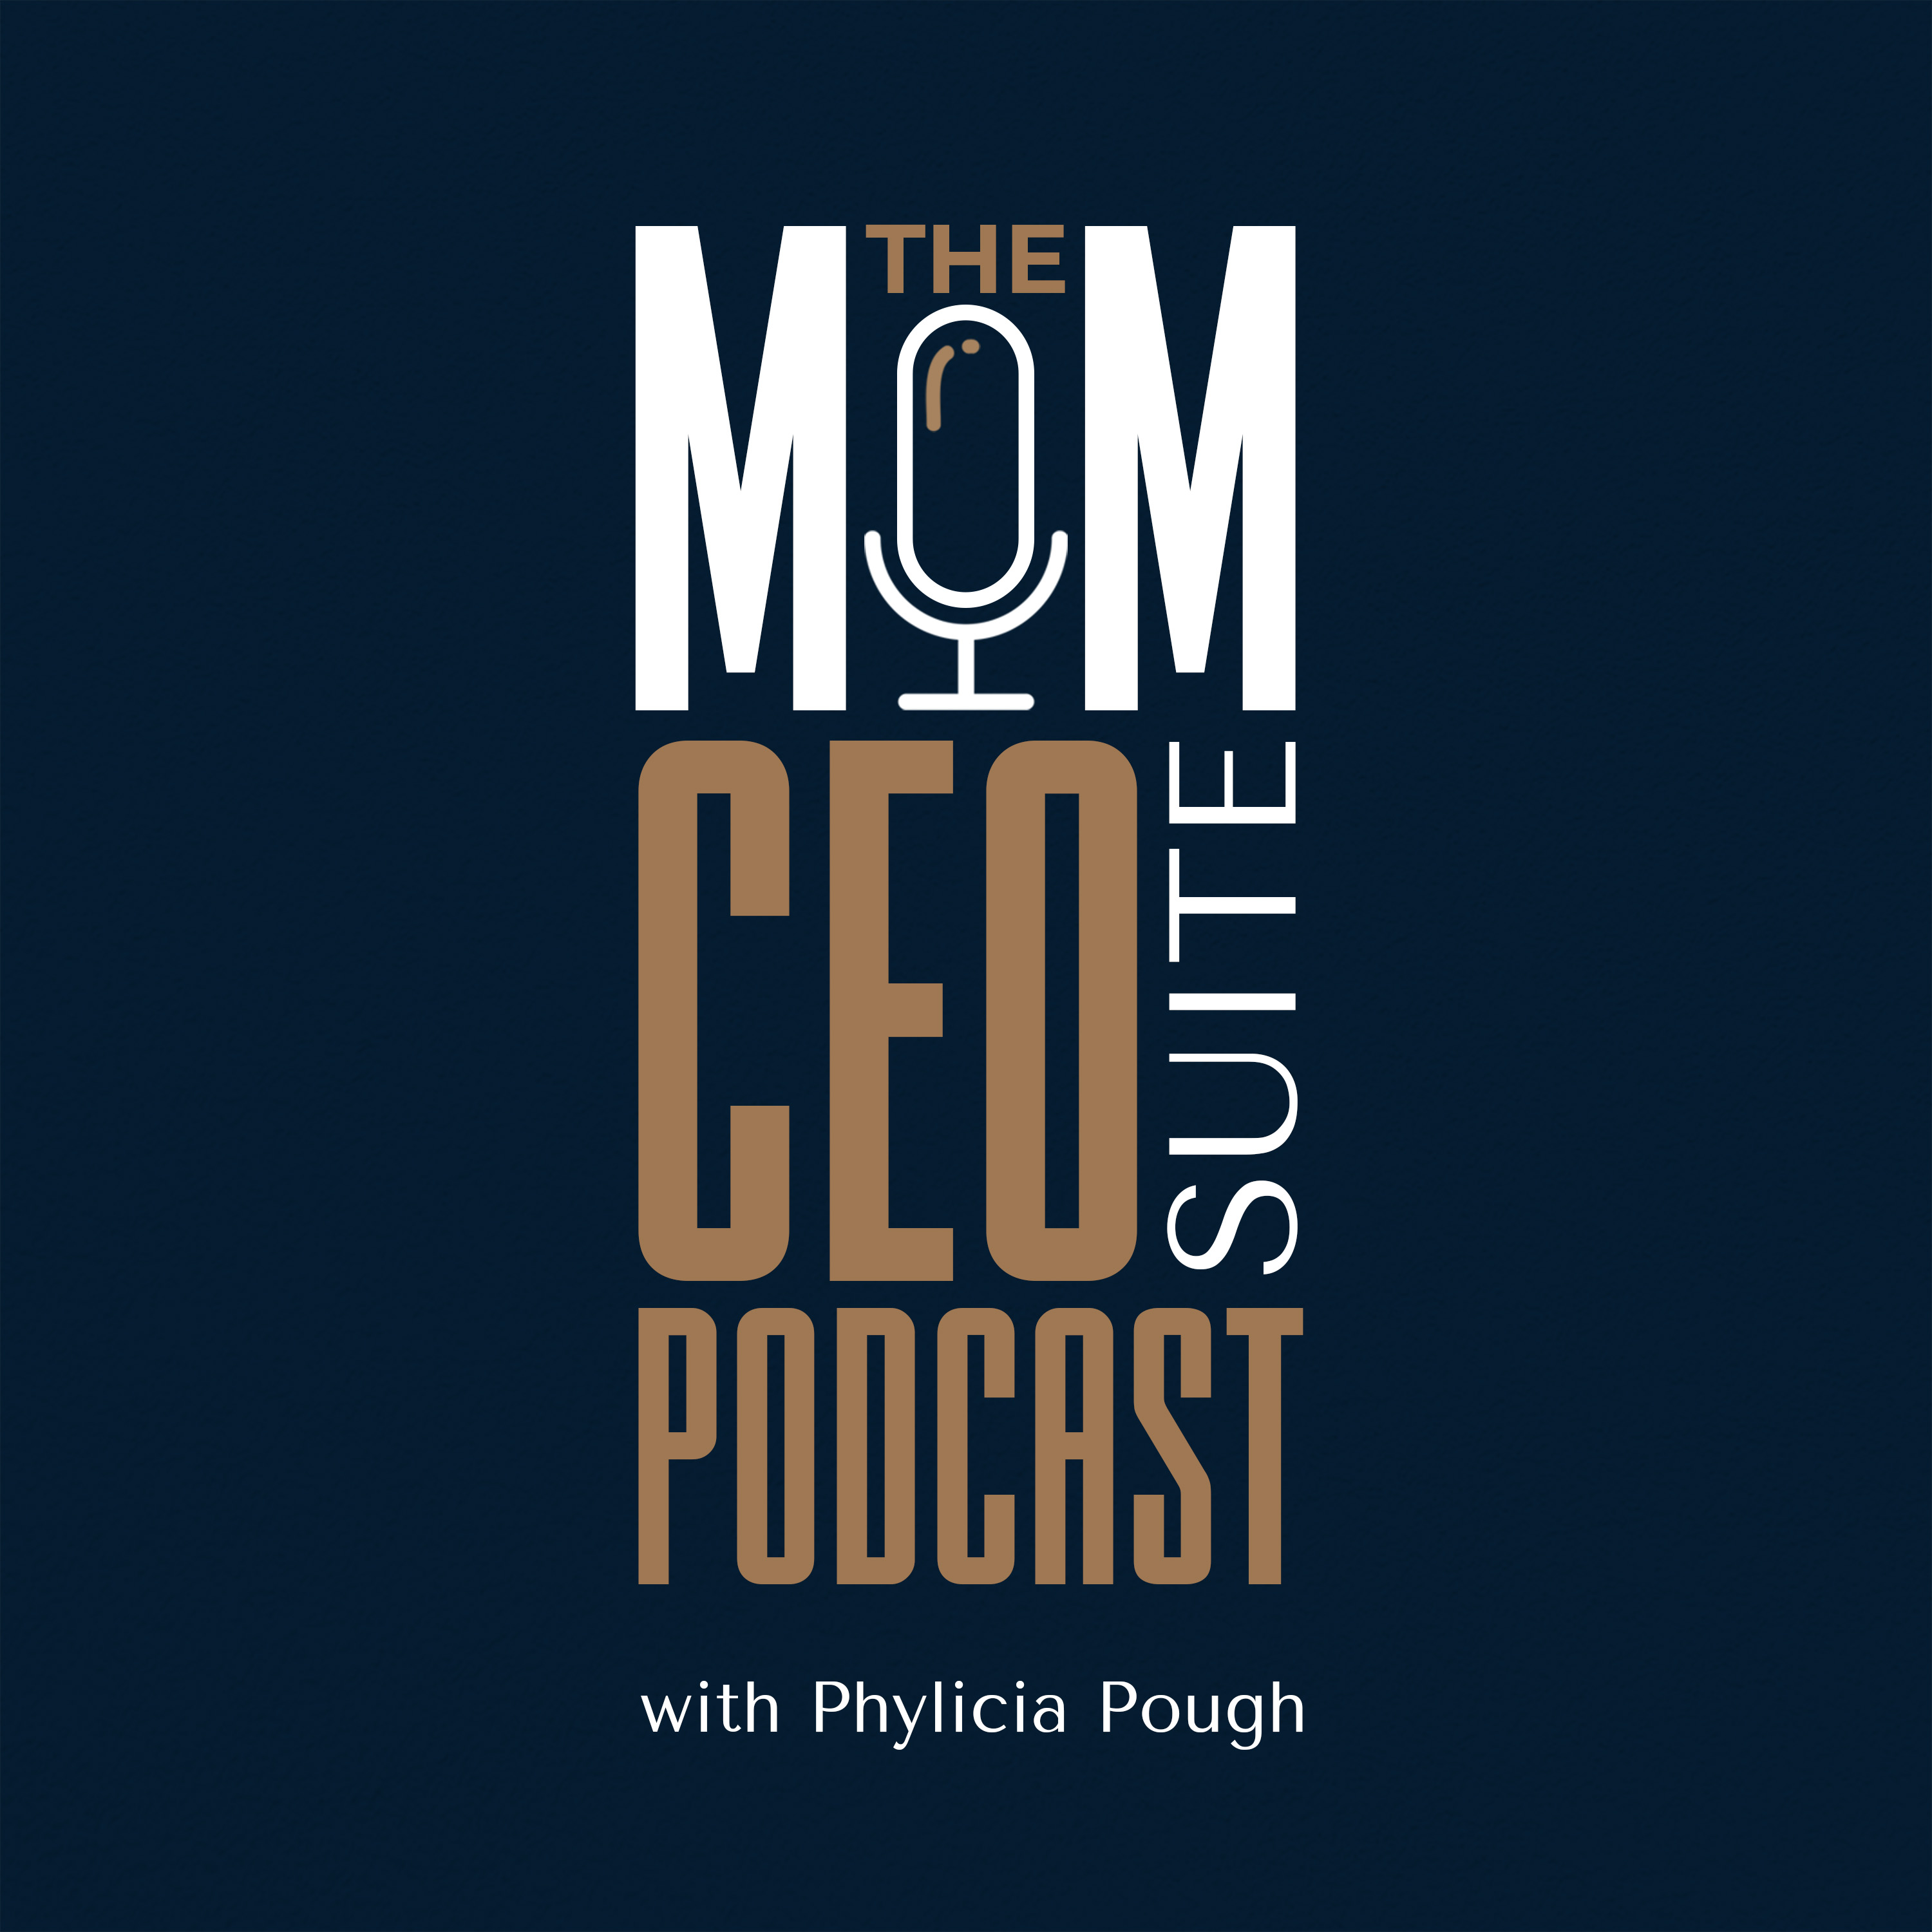 Artwork for podcast The Mom CEO Suite Podcast